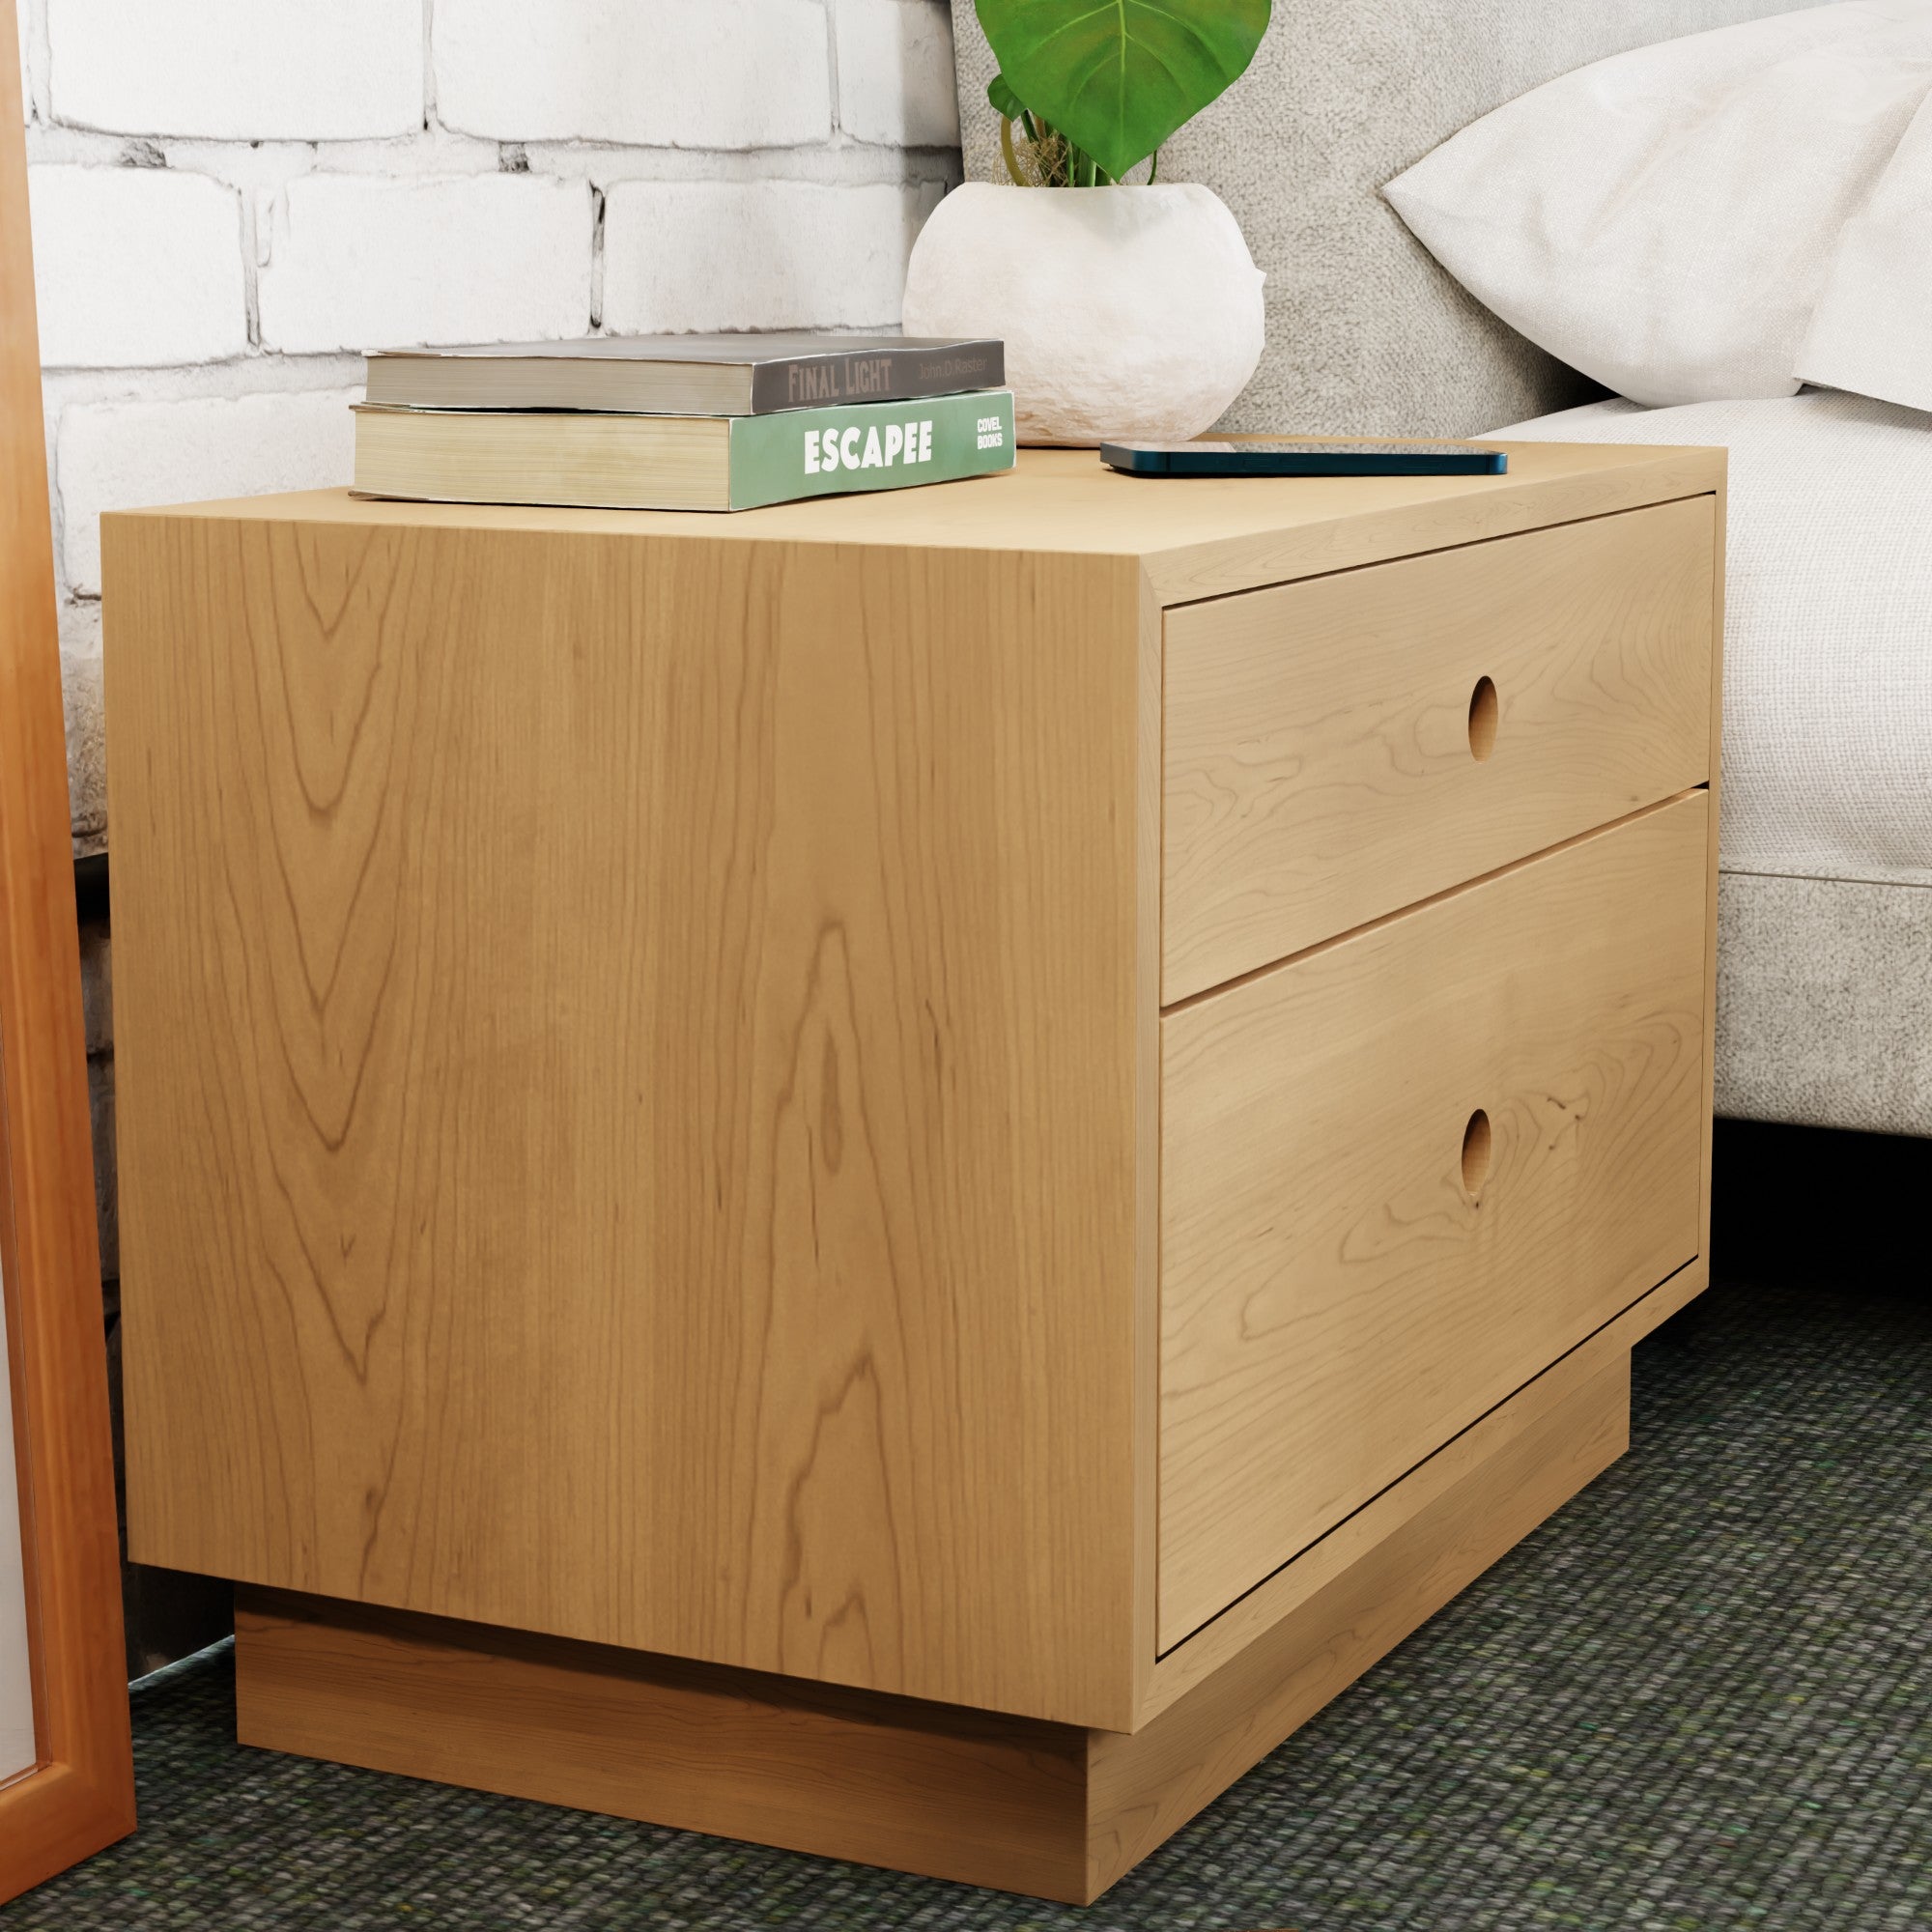 Walnut Freestanding Nightstand with Double Drawers – Krovel Furniture Co.